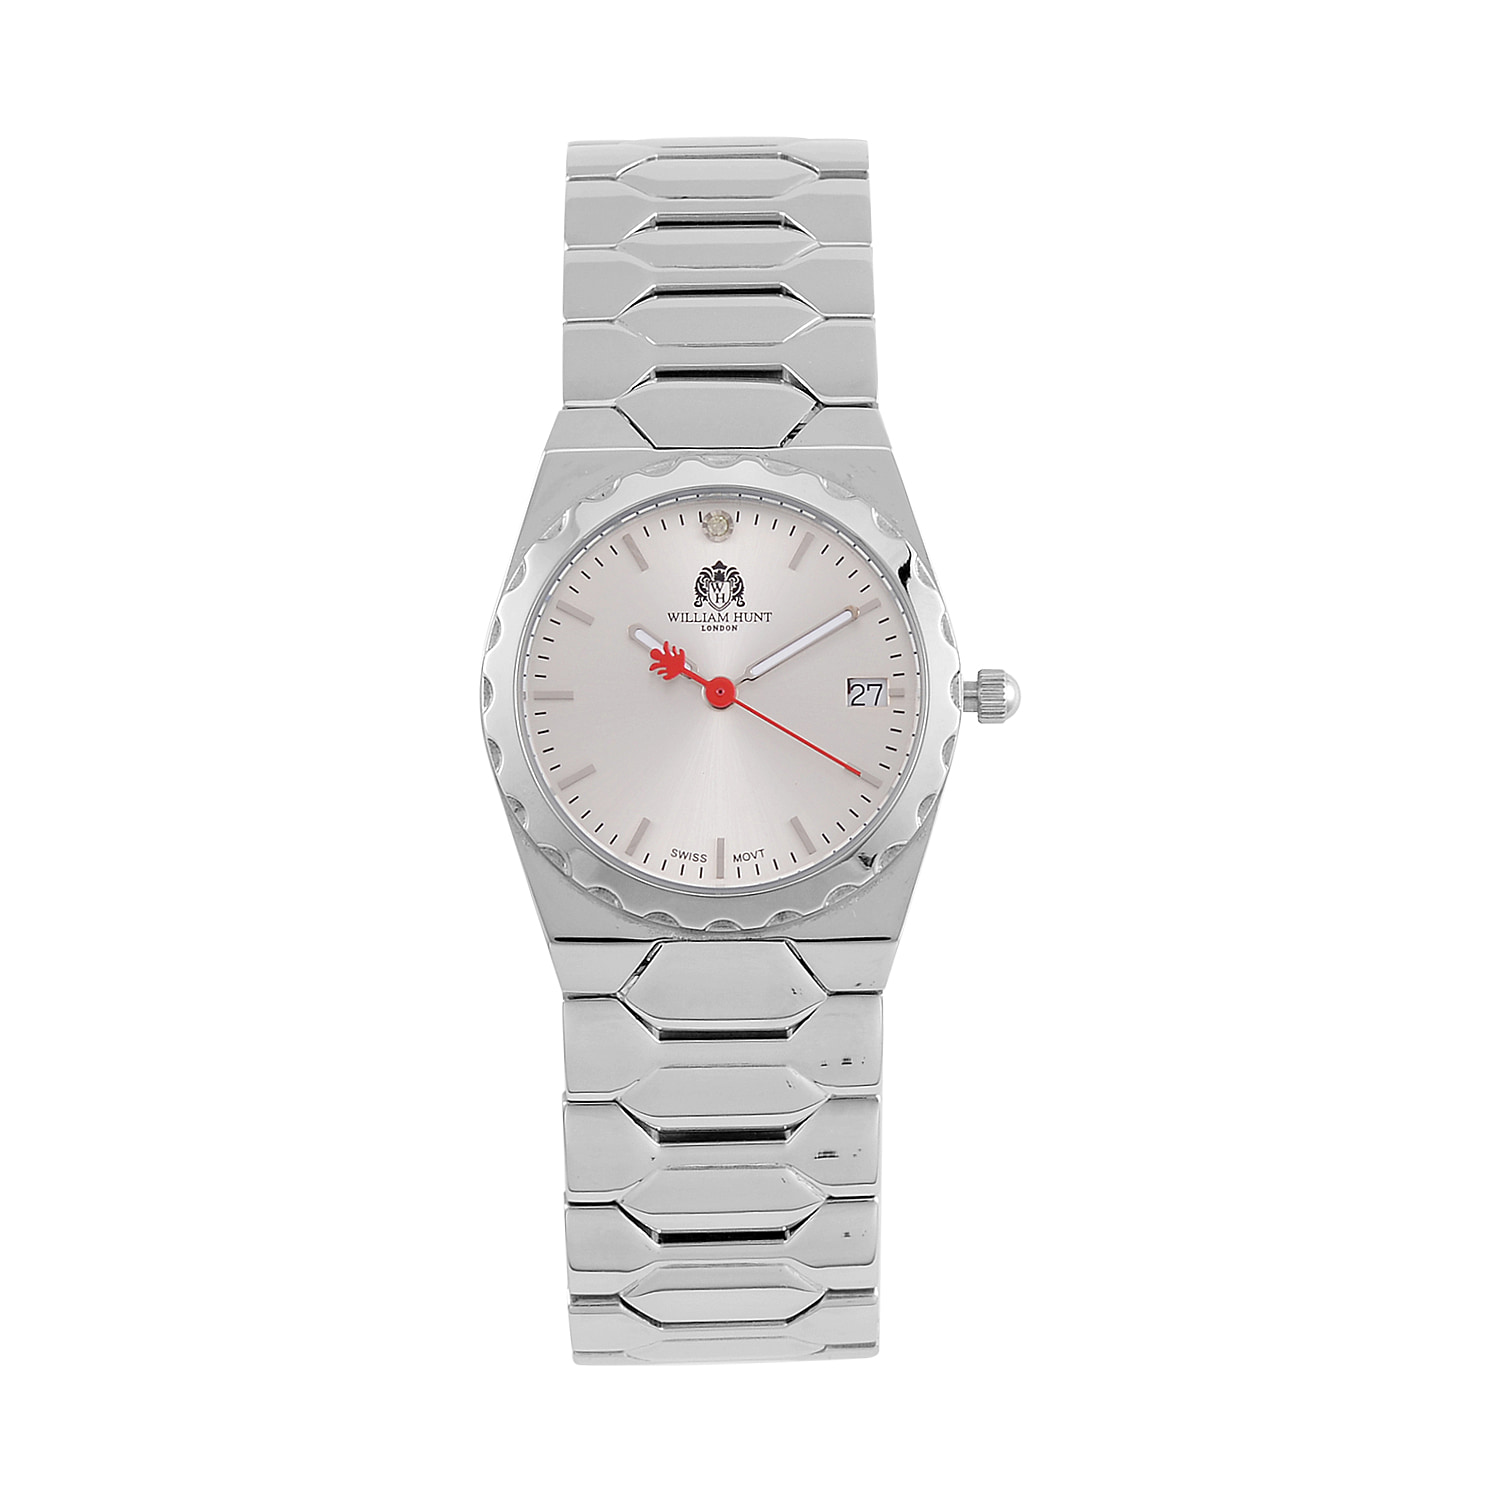 William Hunt Ronda 505 Grey Dial with Date Water Resistant Watch with Stainless Steel Strap in Silver Tone